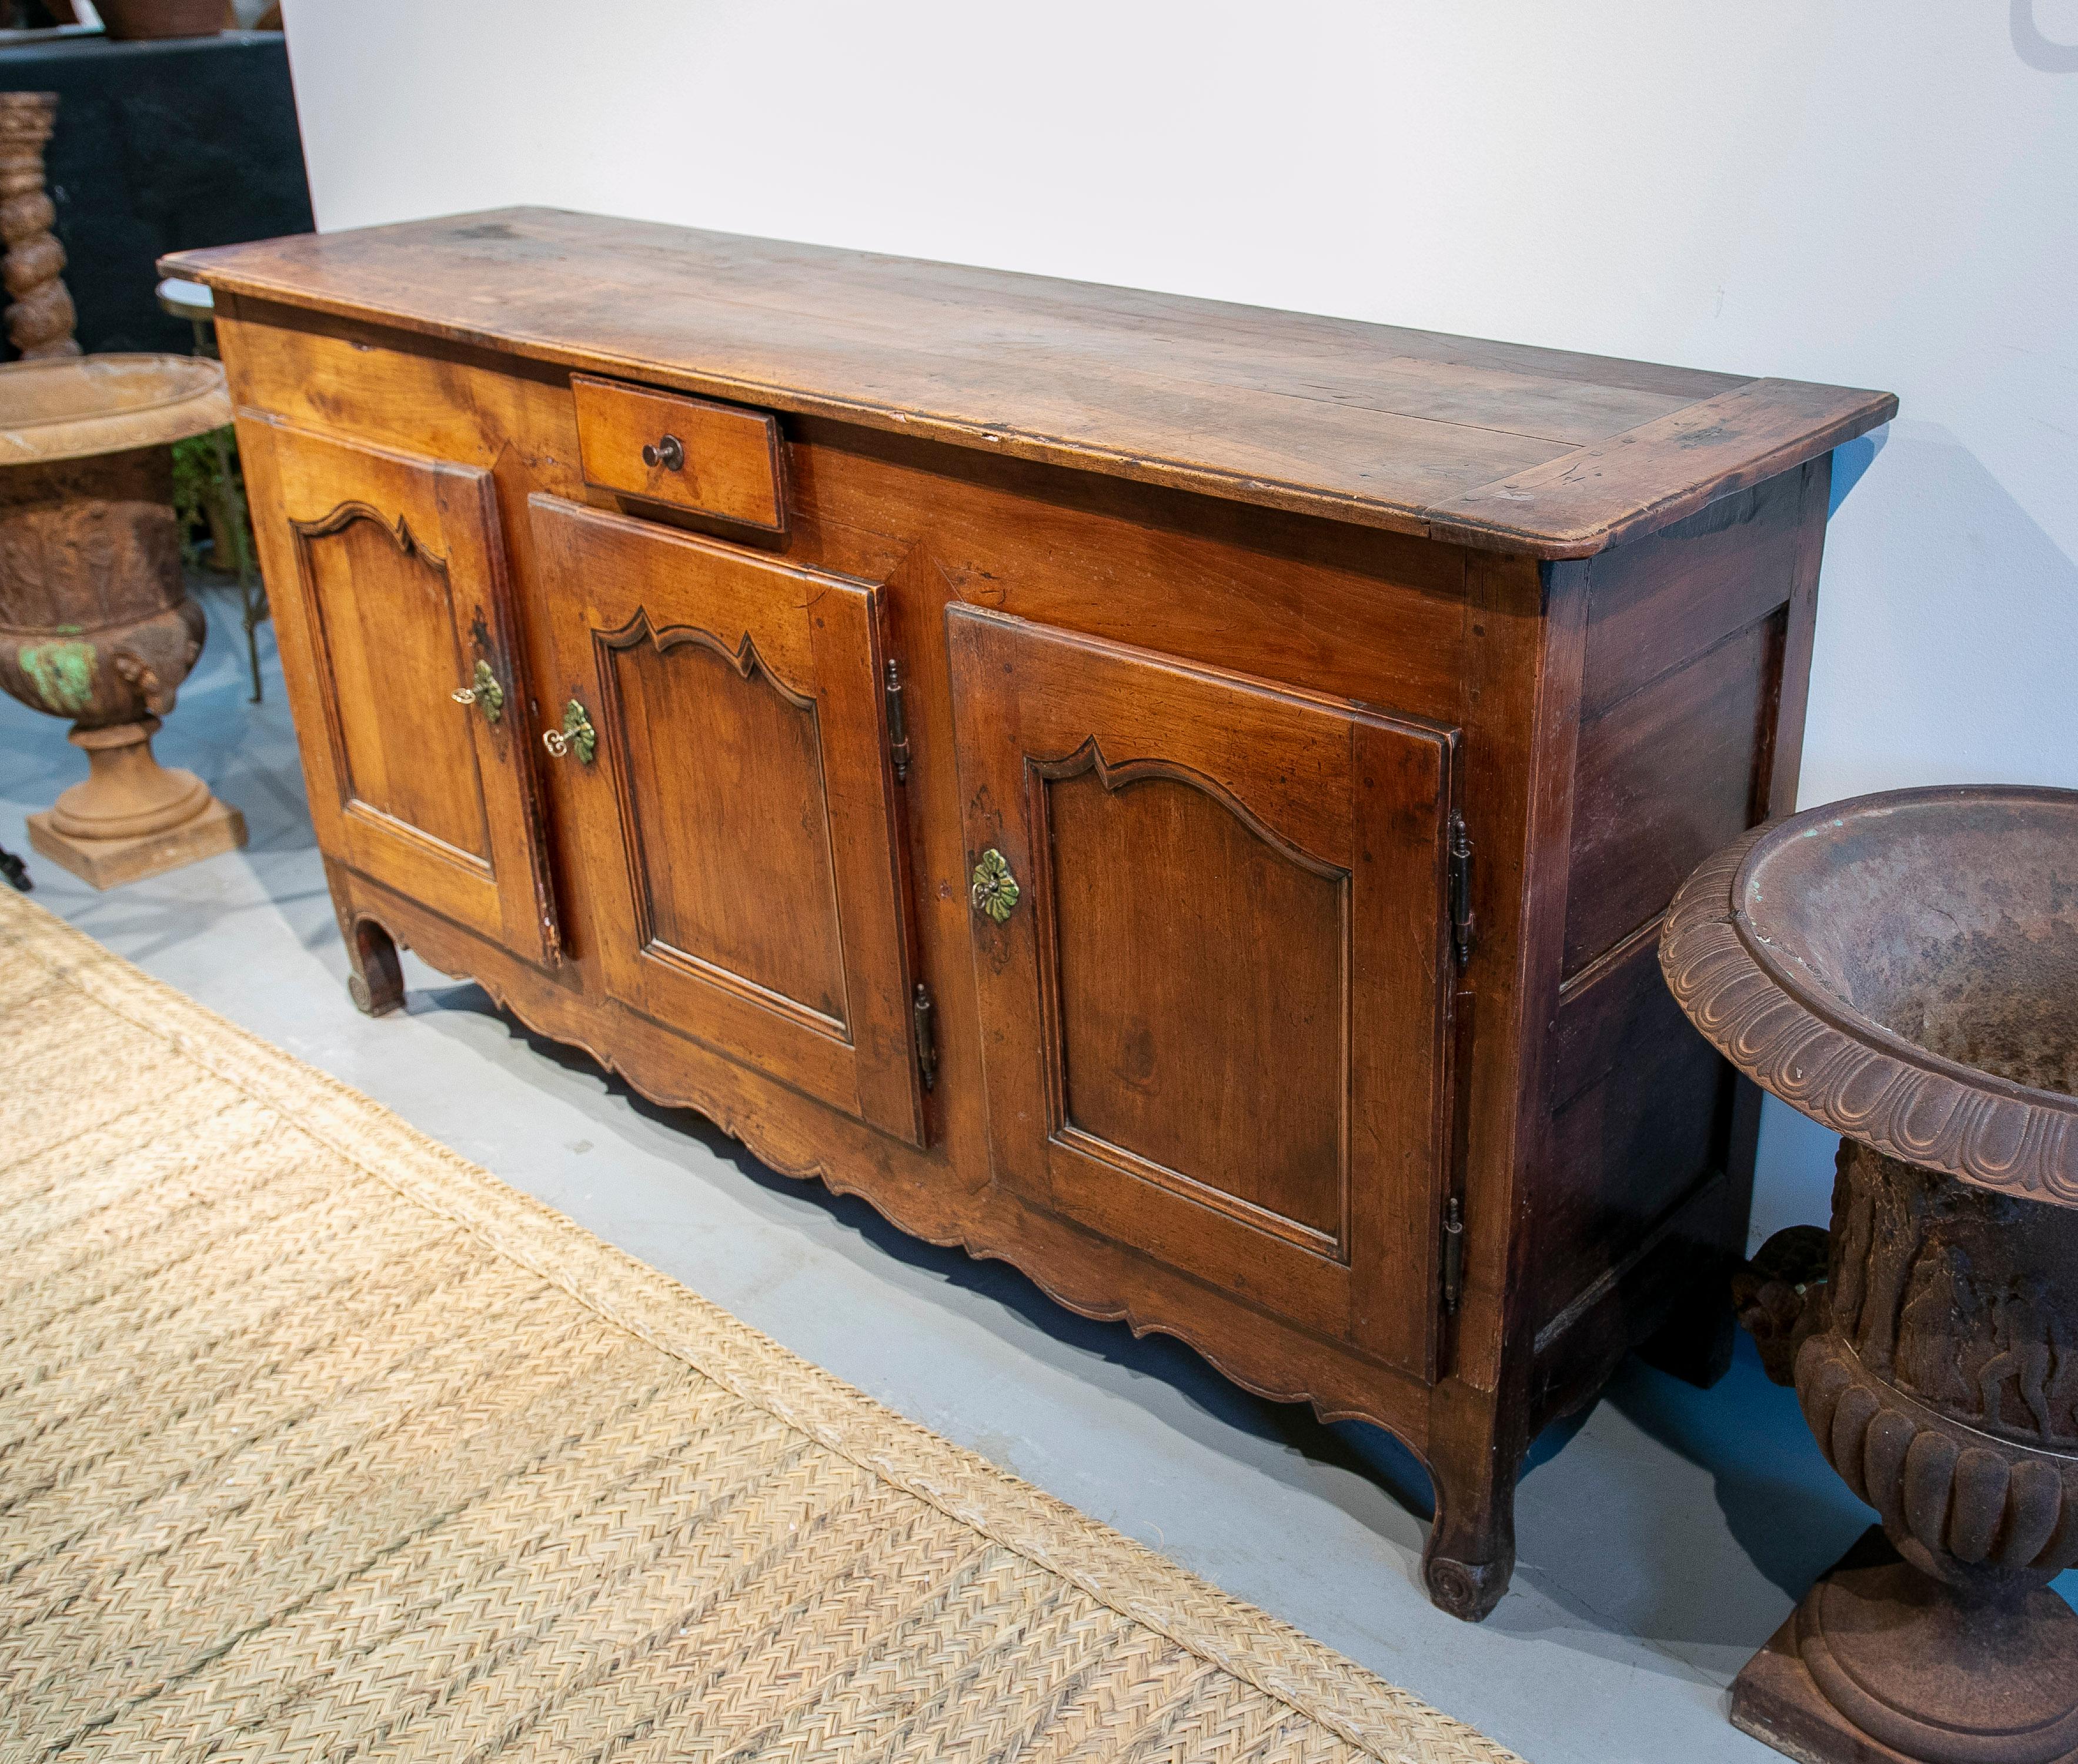 Antique mid-19th century Spanish wooden 1-drawer and 2-door farmhouse sideboard buffet table with bronze hardware.